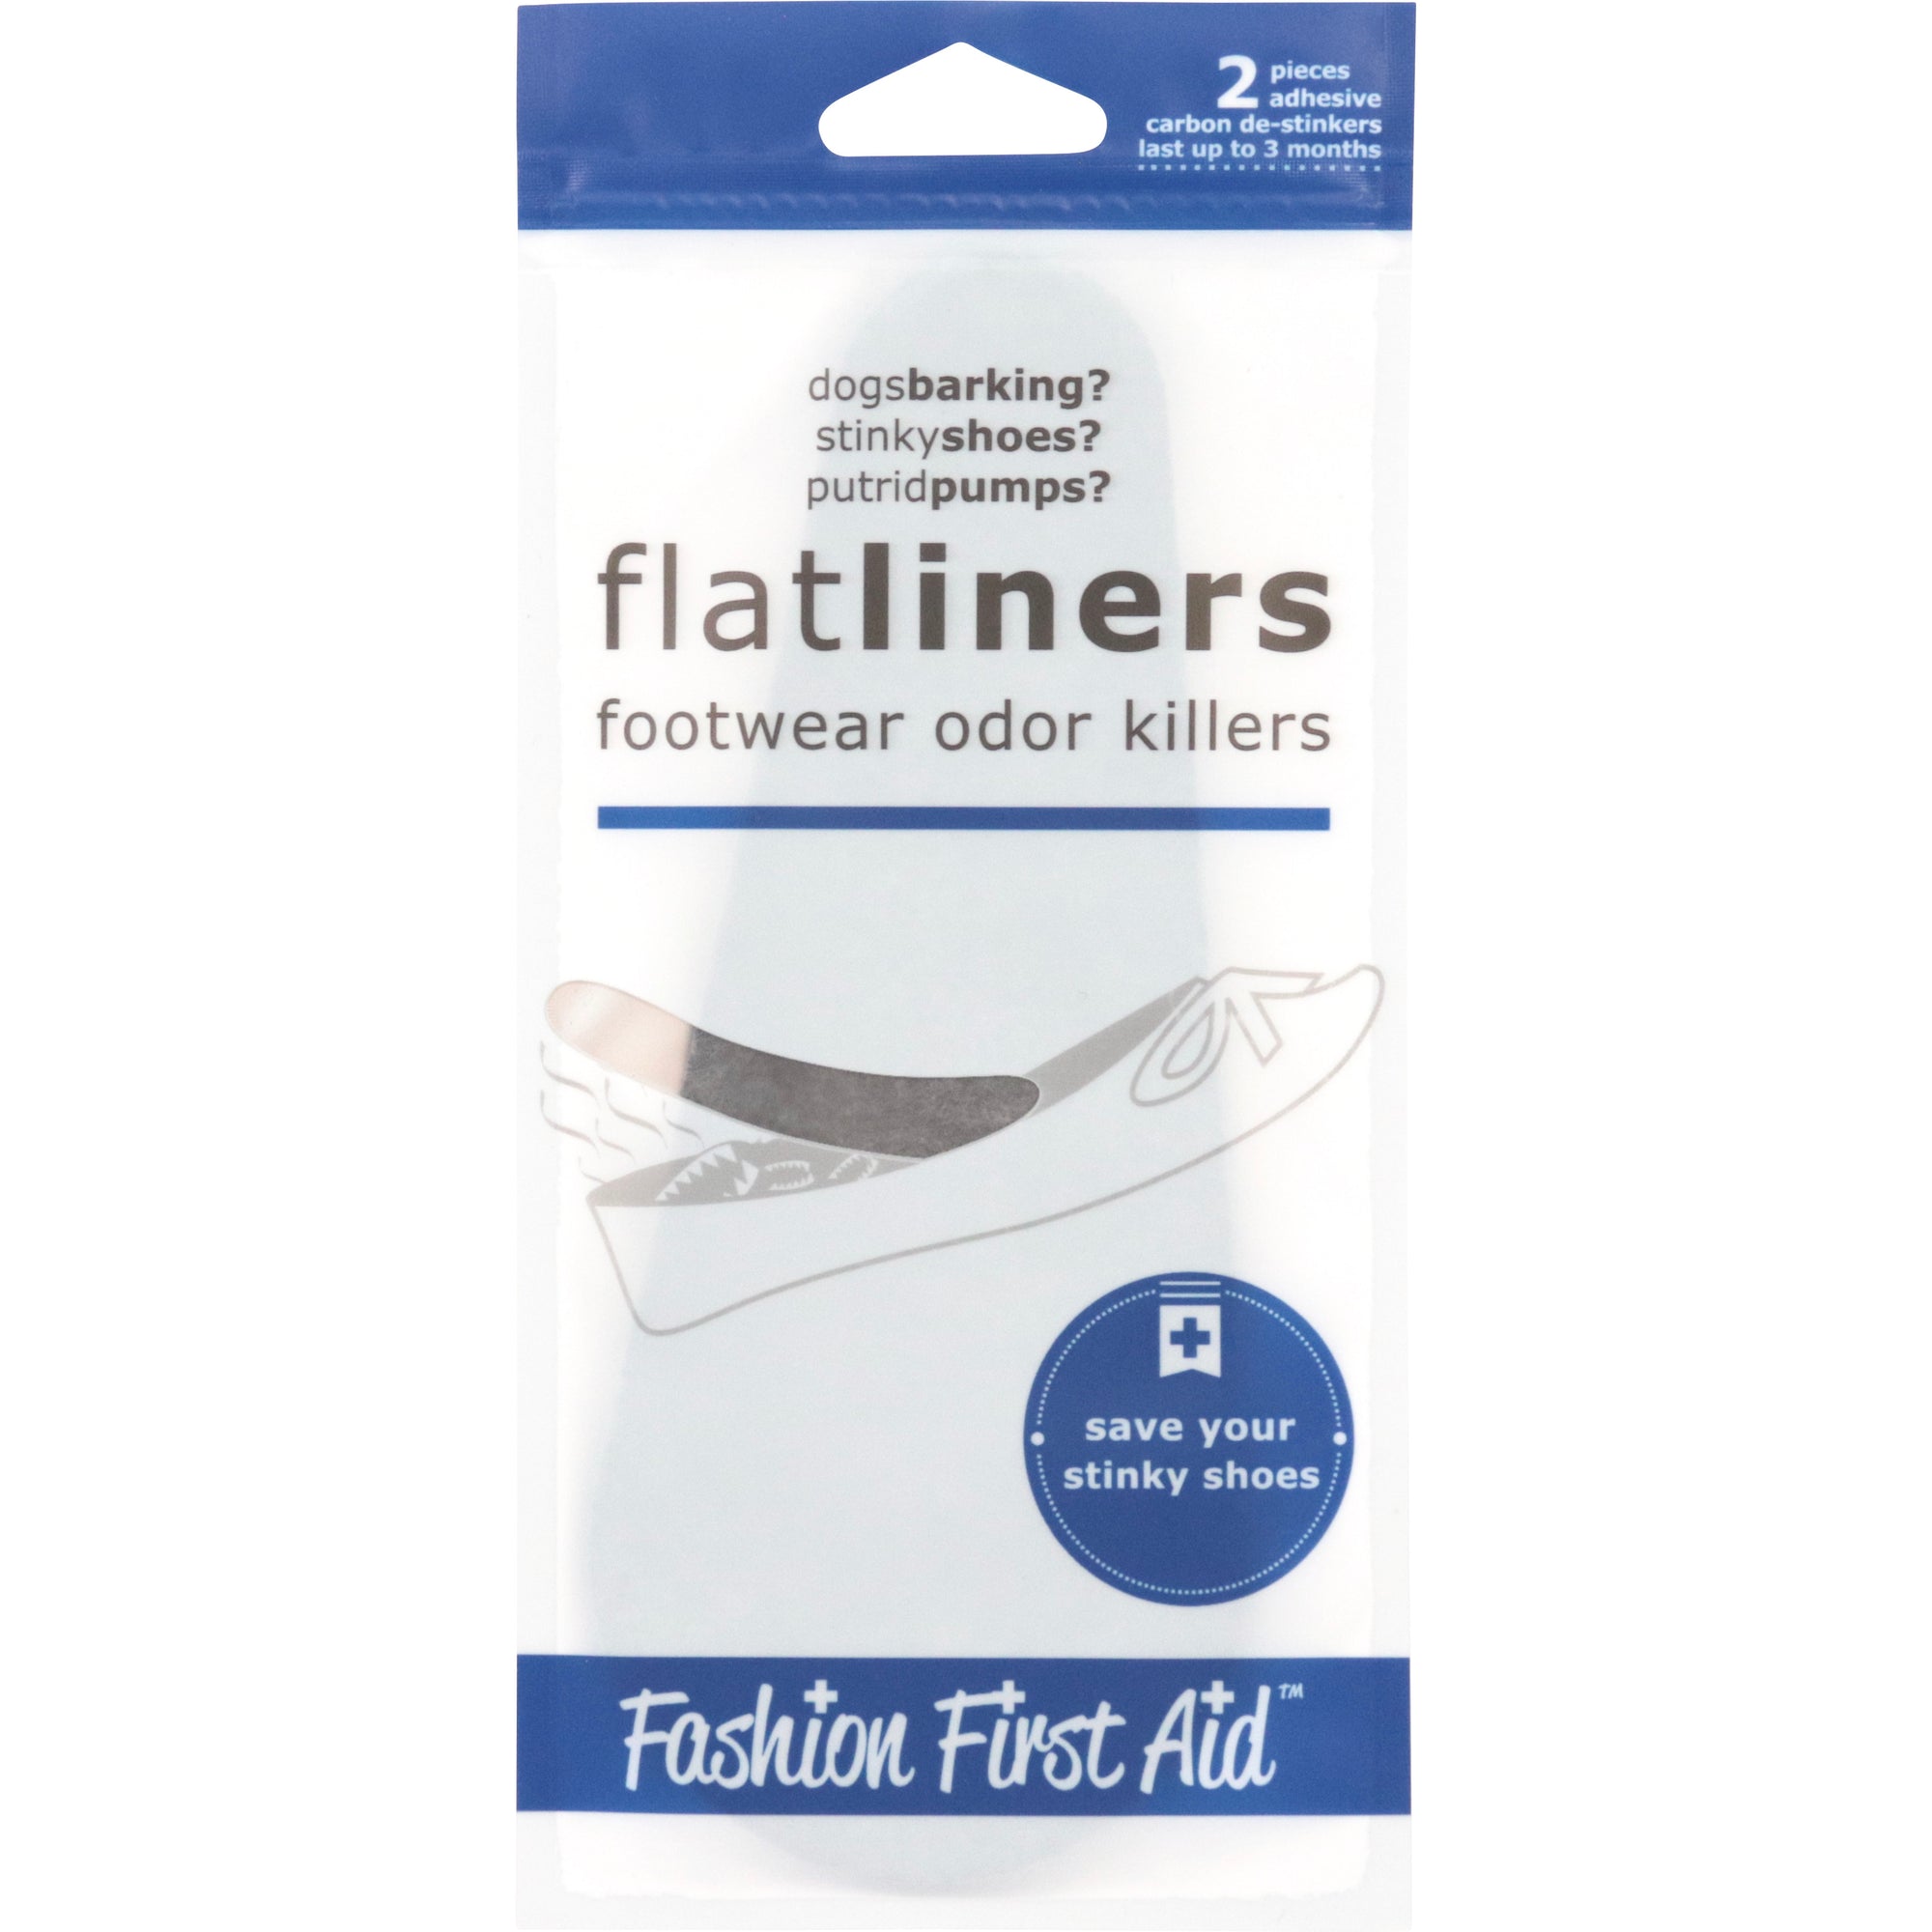 Flatliners- shoe deodorizers for fresh smelling shoes